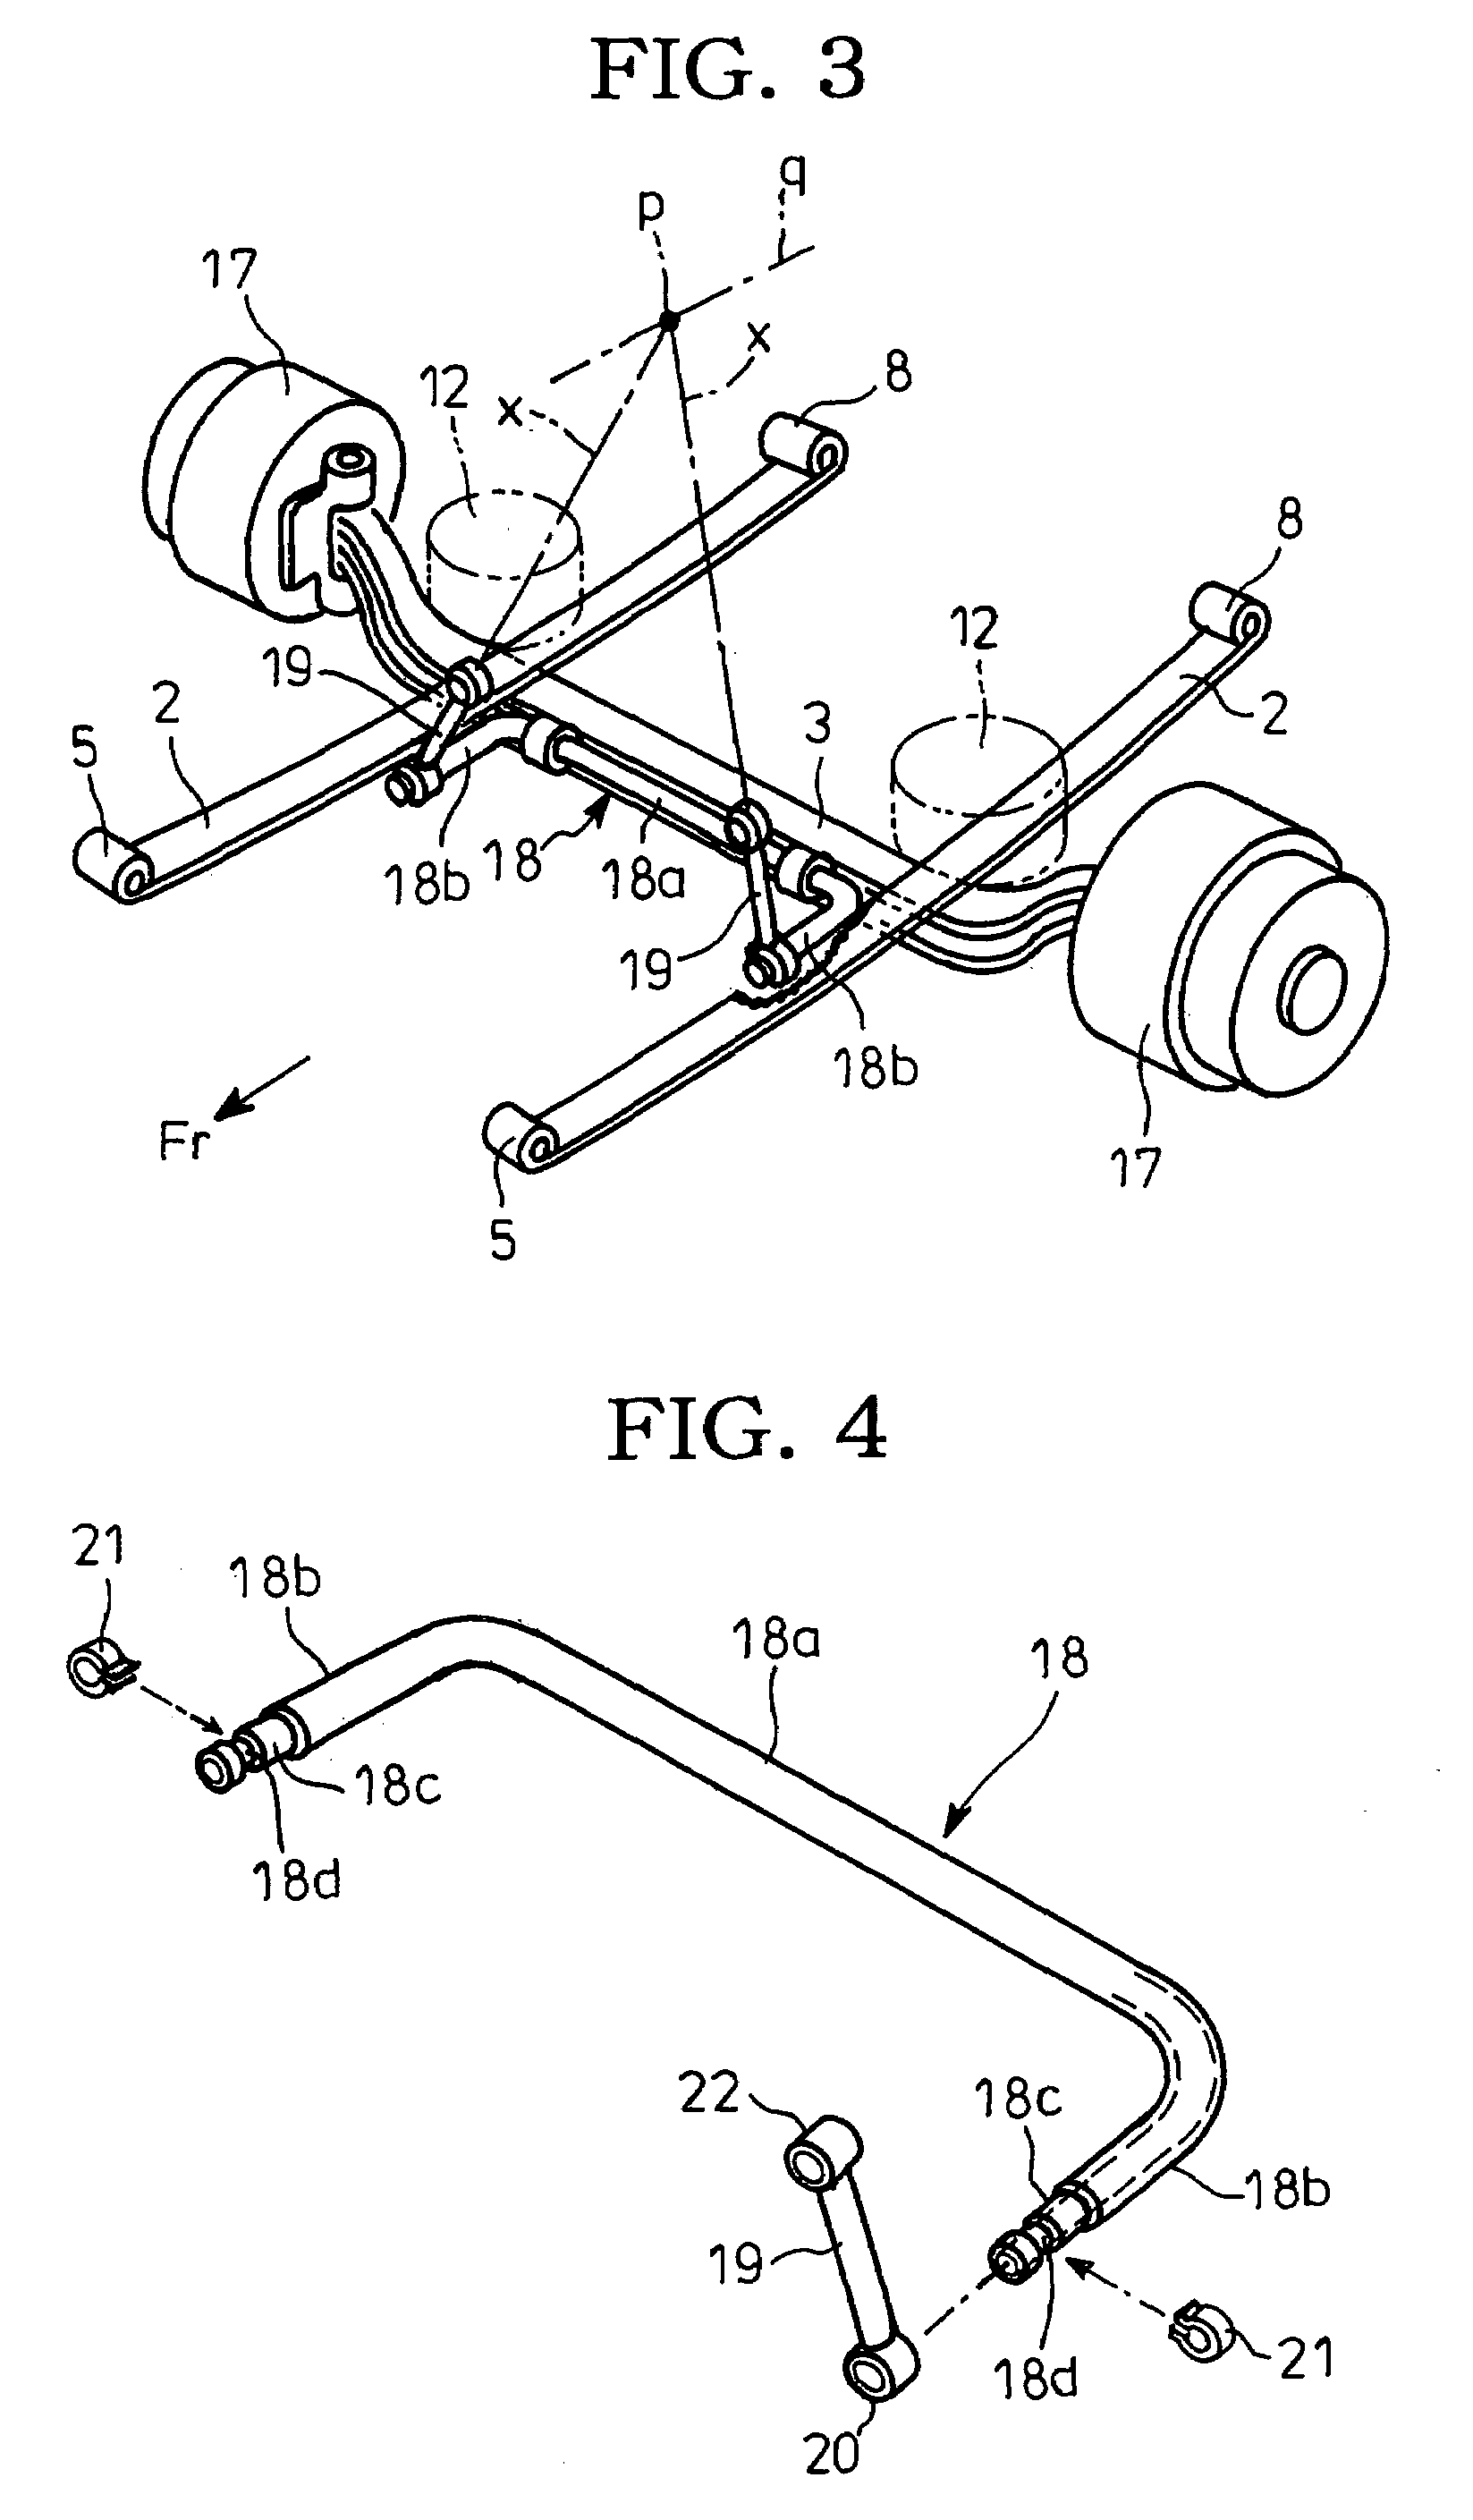 Stabilizer and air leaf suspension using the same